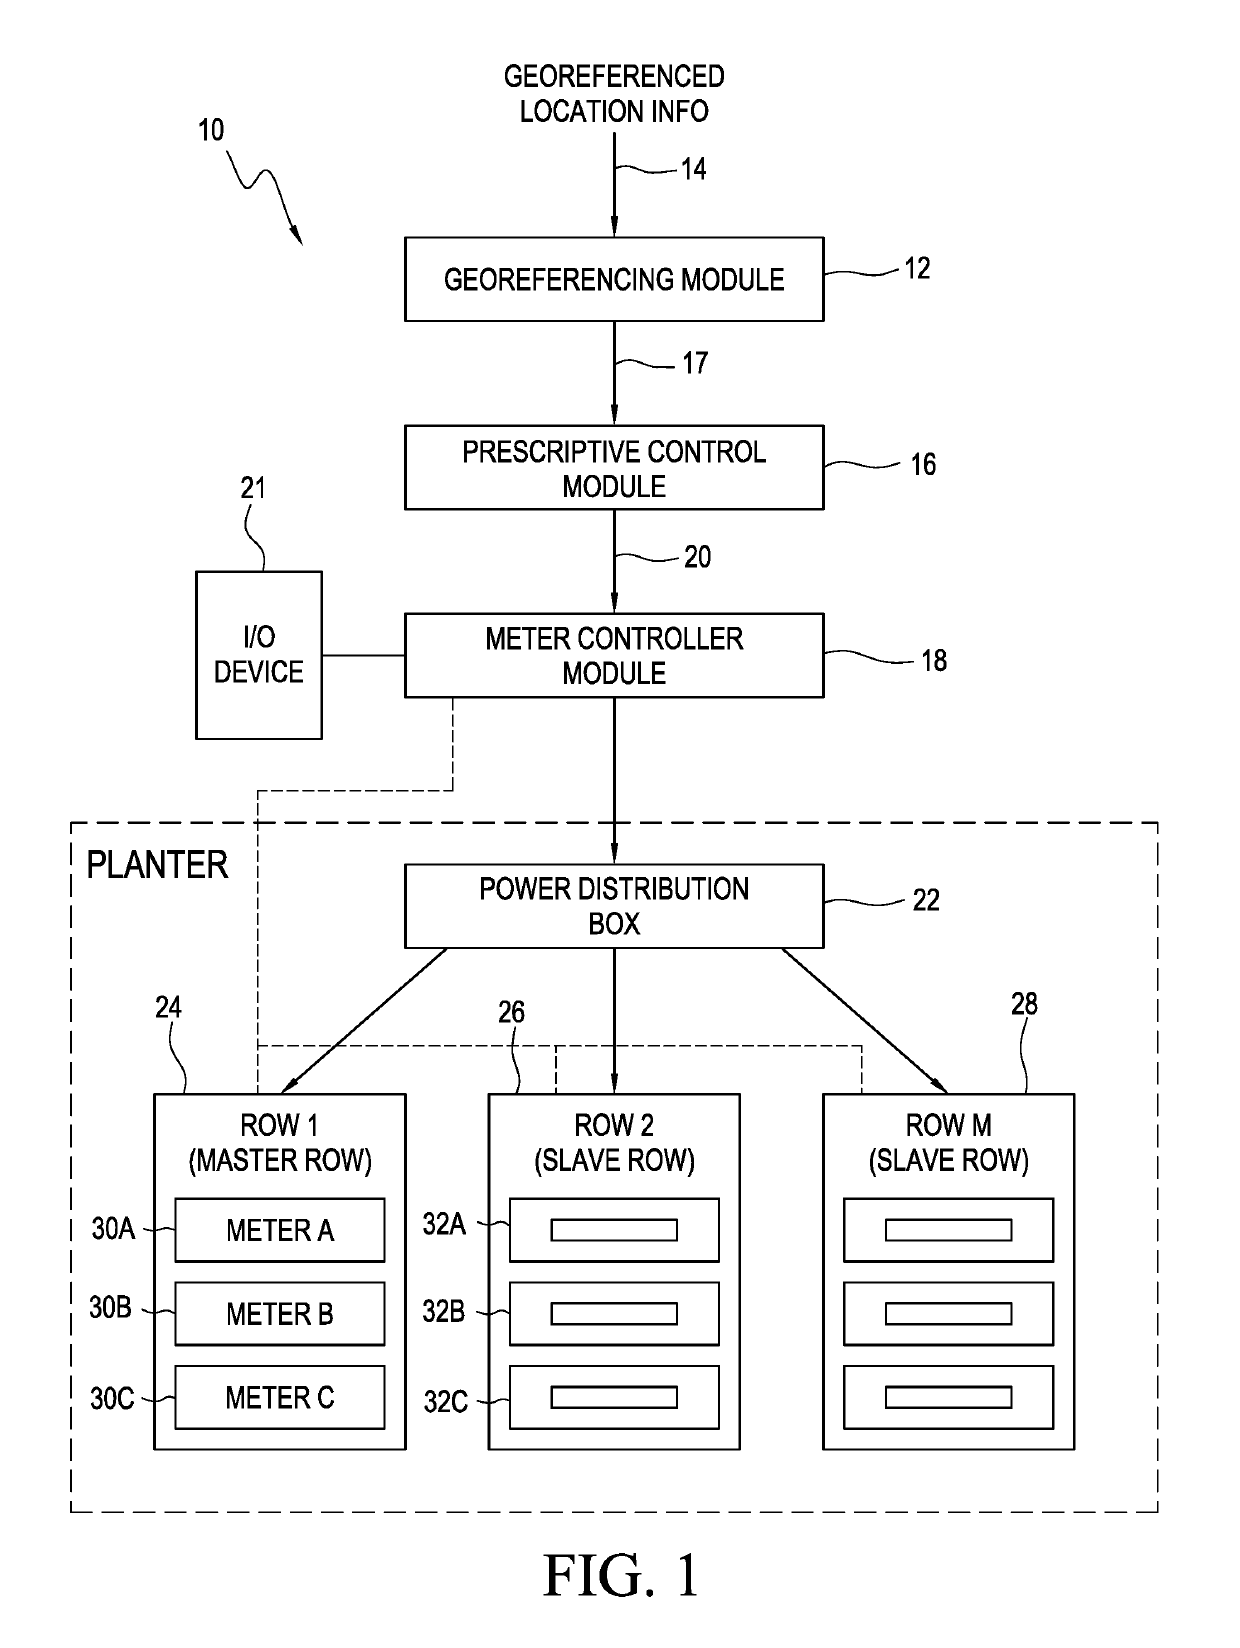 System for providing prescriptive application of multiple products